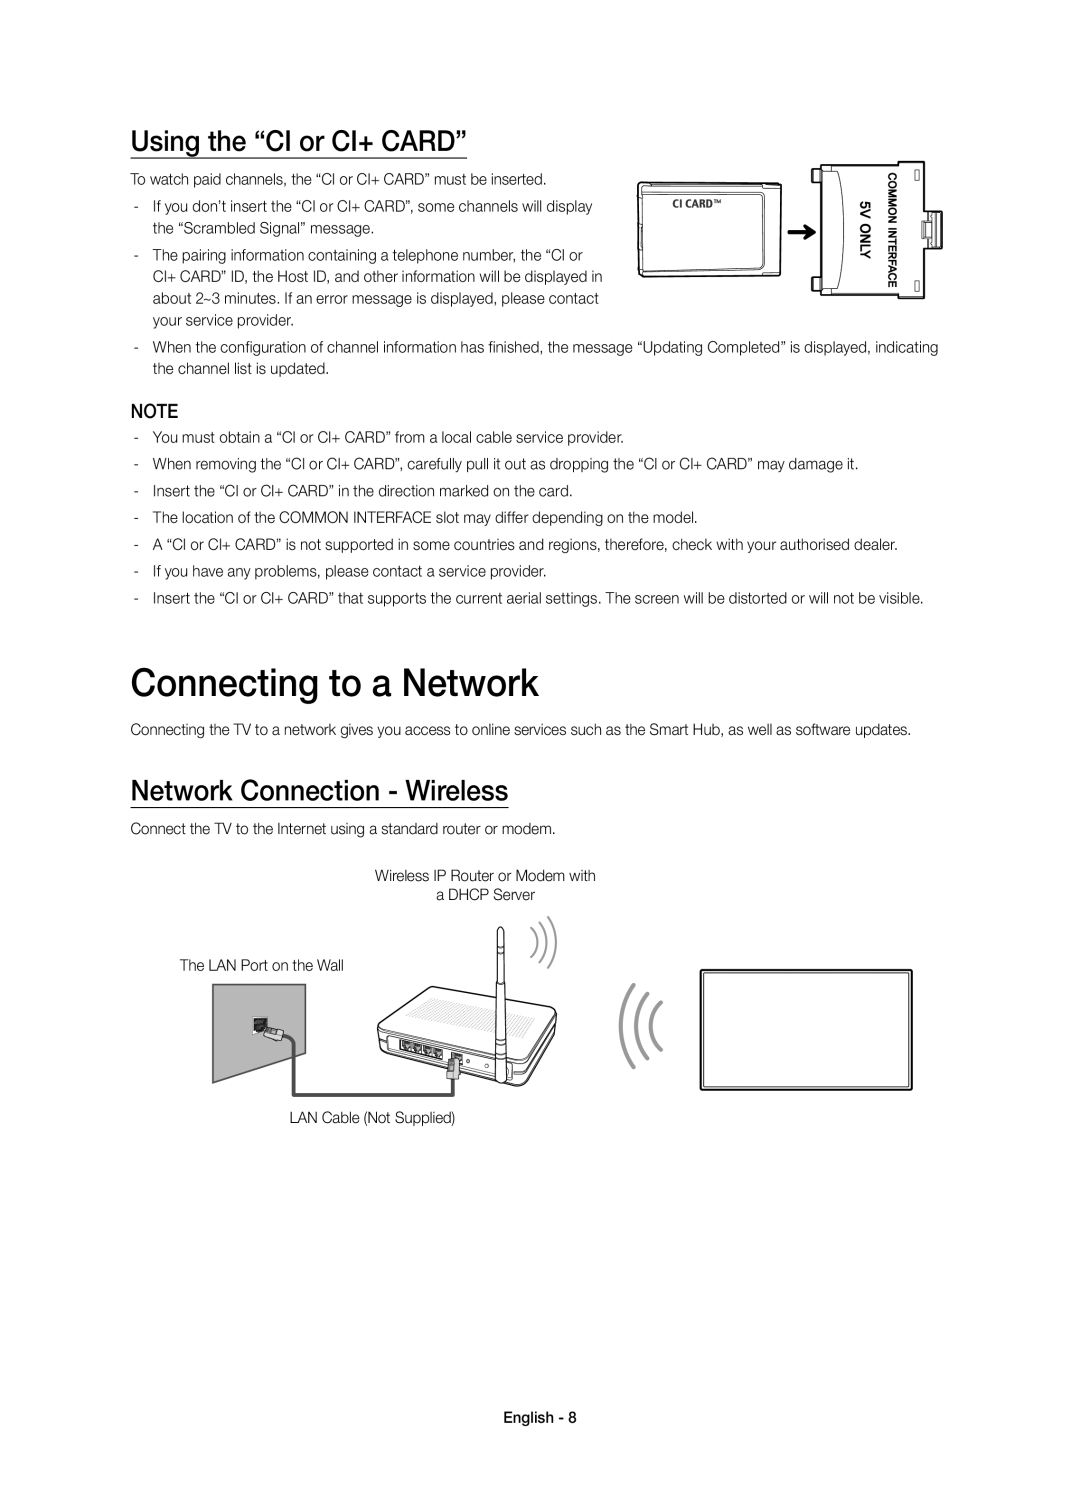 Samsung UE40H6410SSXXC, UE32H6410SSXXC Connecting to a Network, Using the “CI or CI+ CARD”, Network Connection - Wireless 